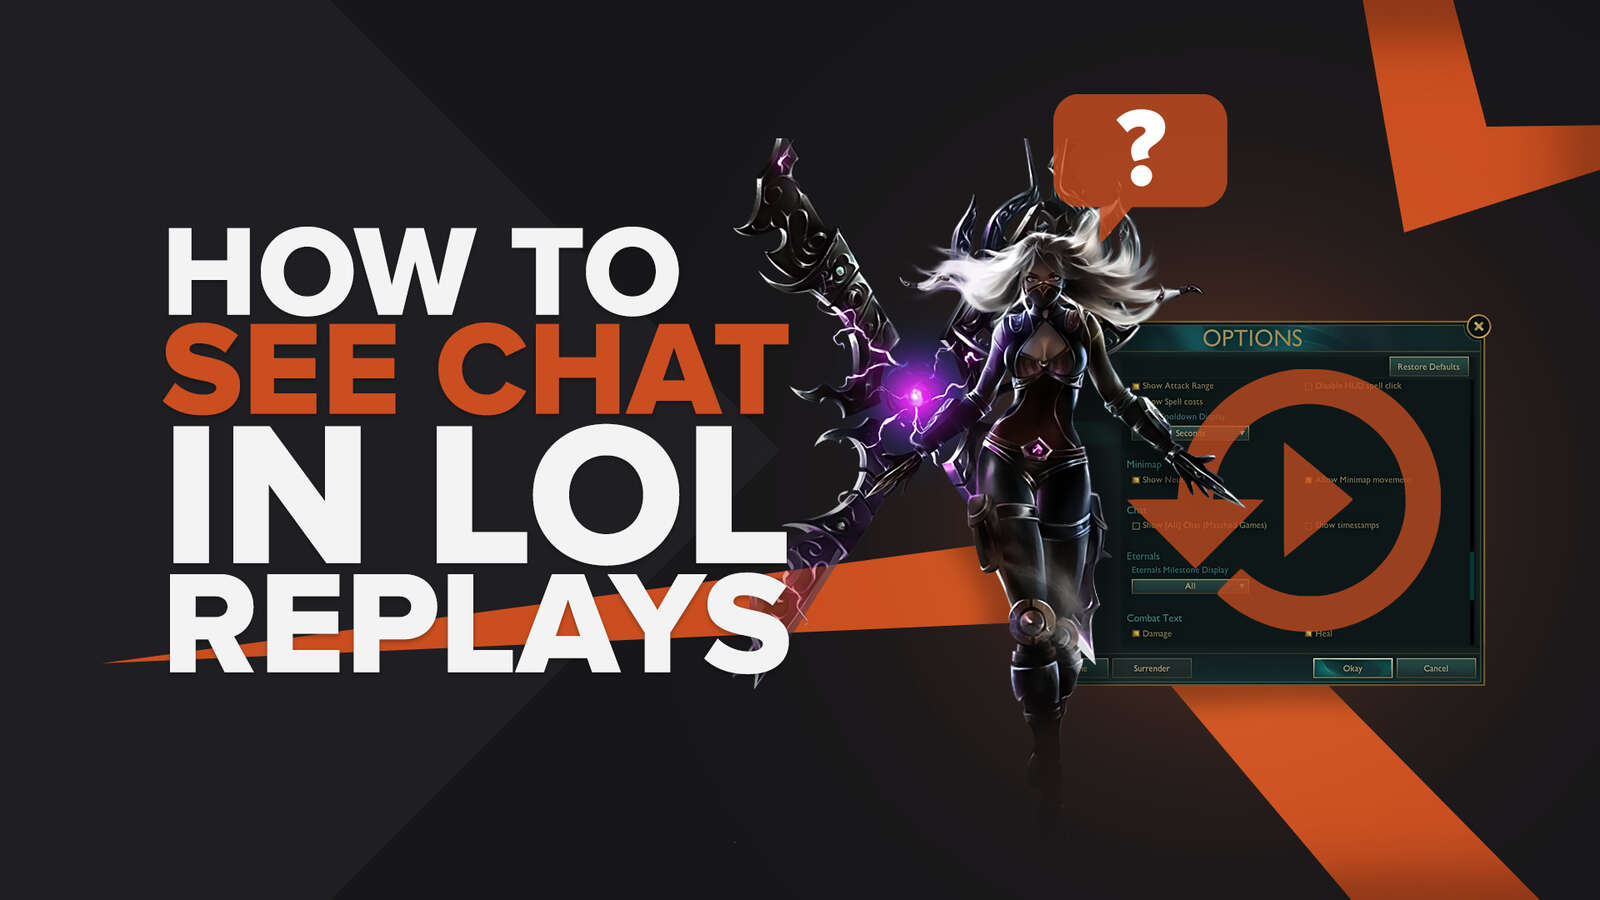 How to See Chat in League of Legends Replays